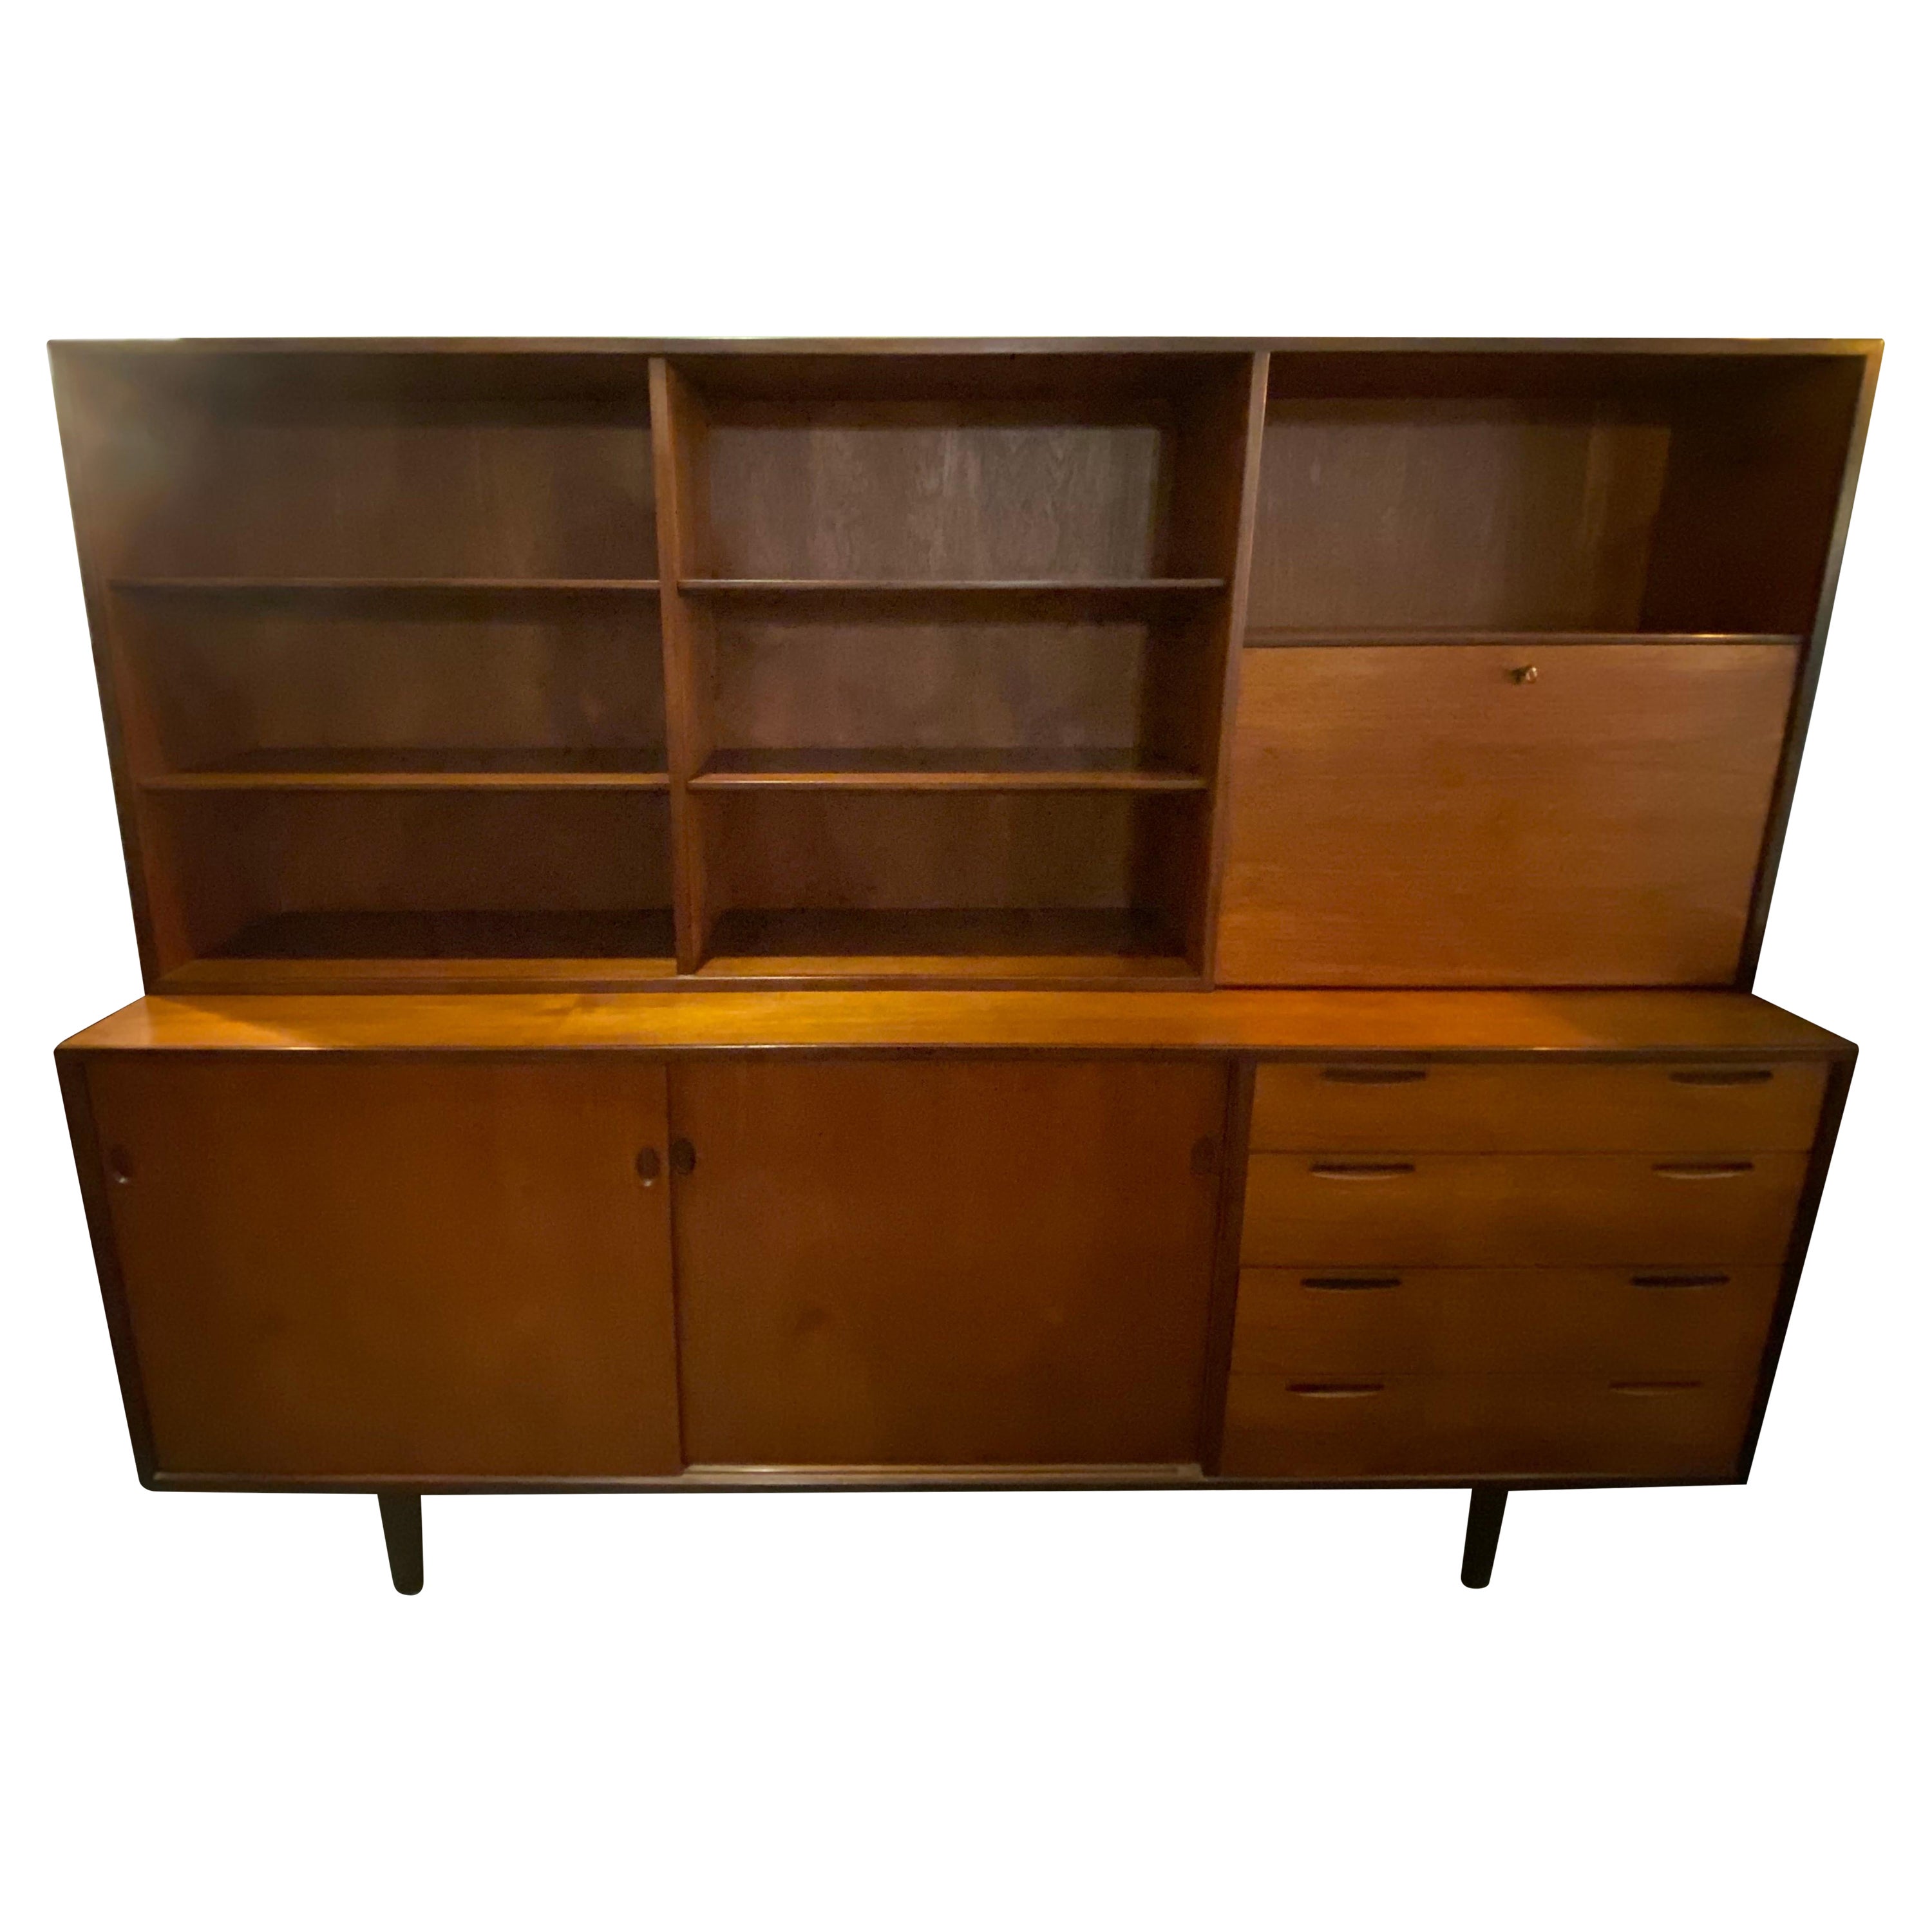 Danish Modern Credenza with Hutch by Kofod-Larsen for J Clausen 